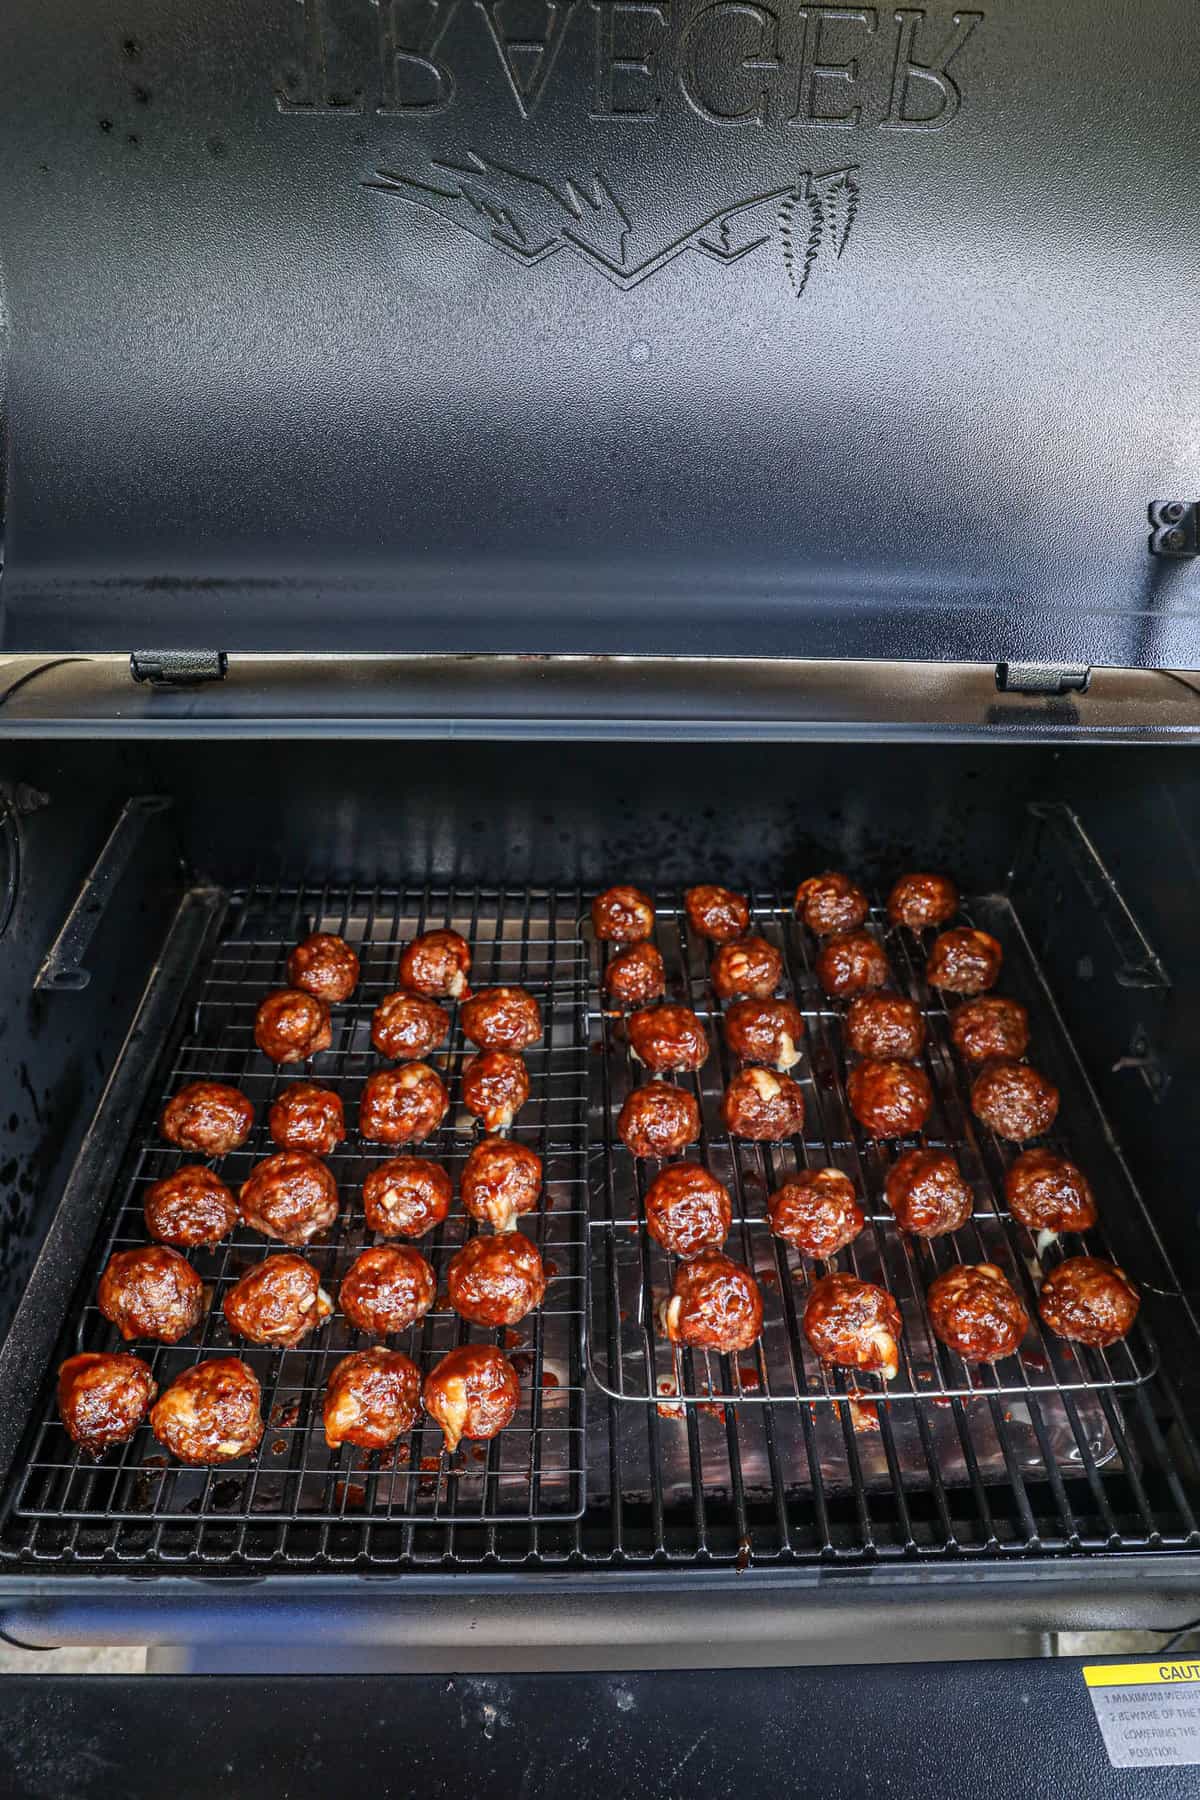 Sauce brushed onto meatballs in smoker for Smoked Cheese Stuffed Meatballs recipe